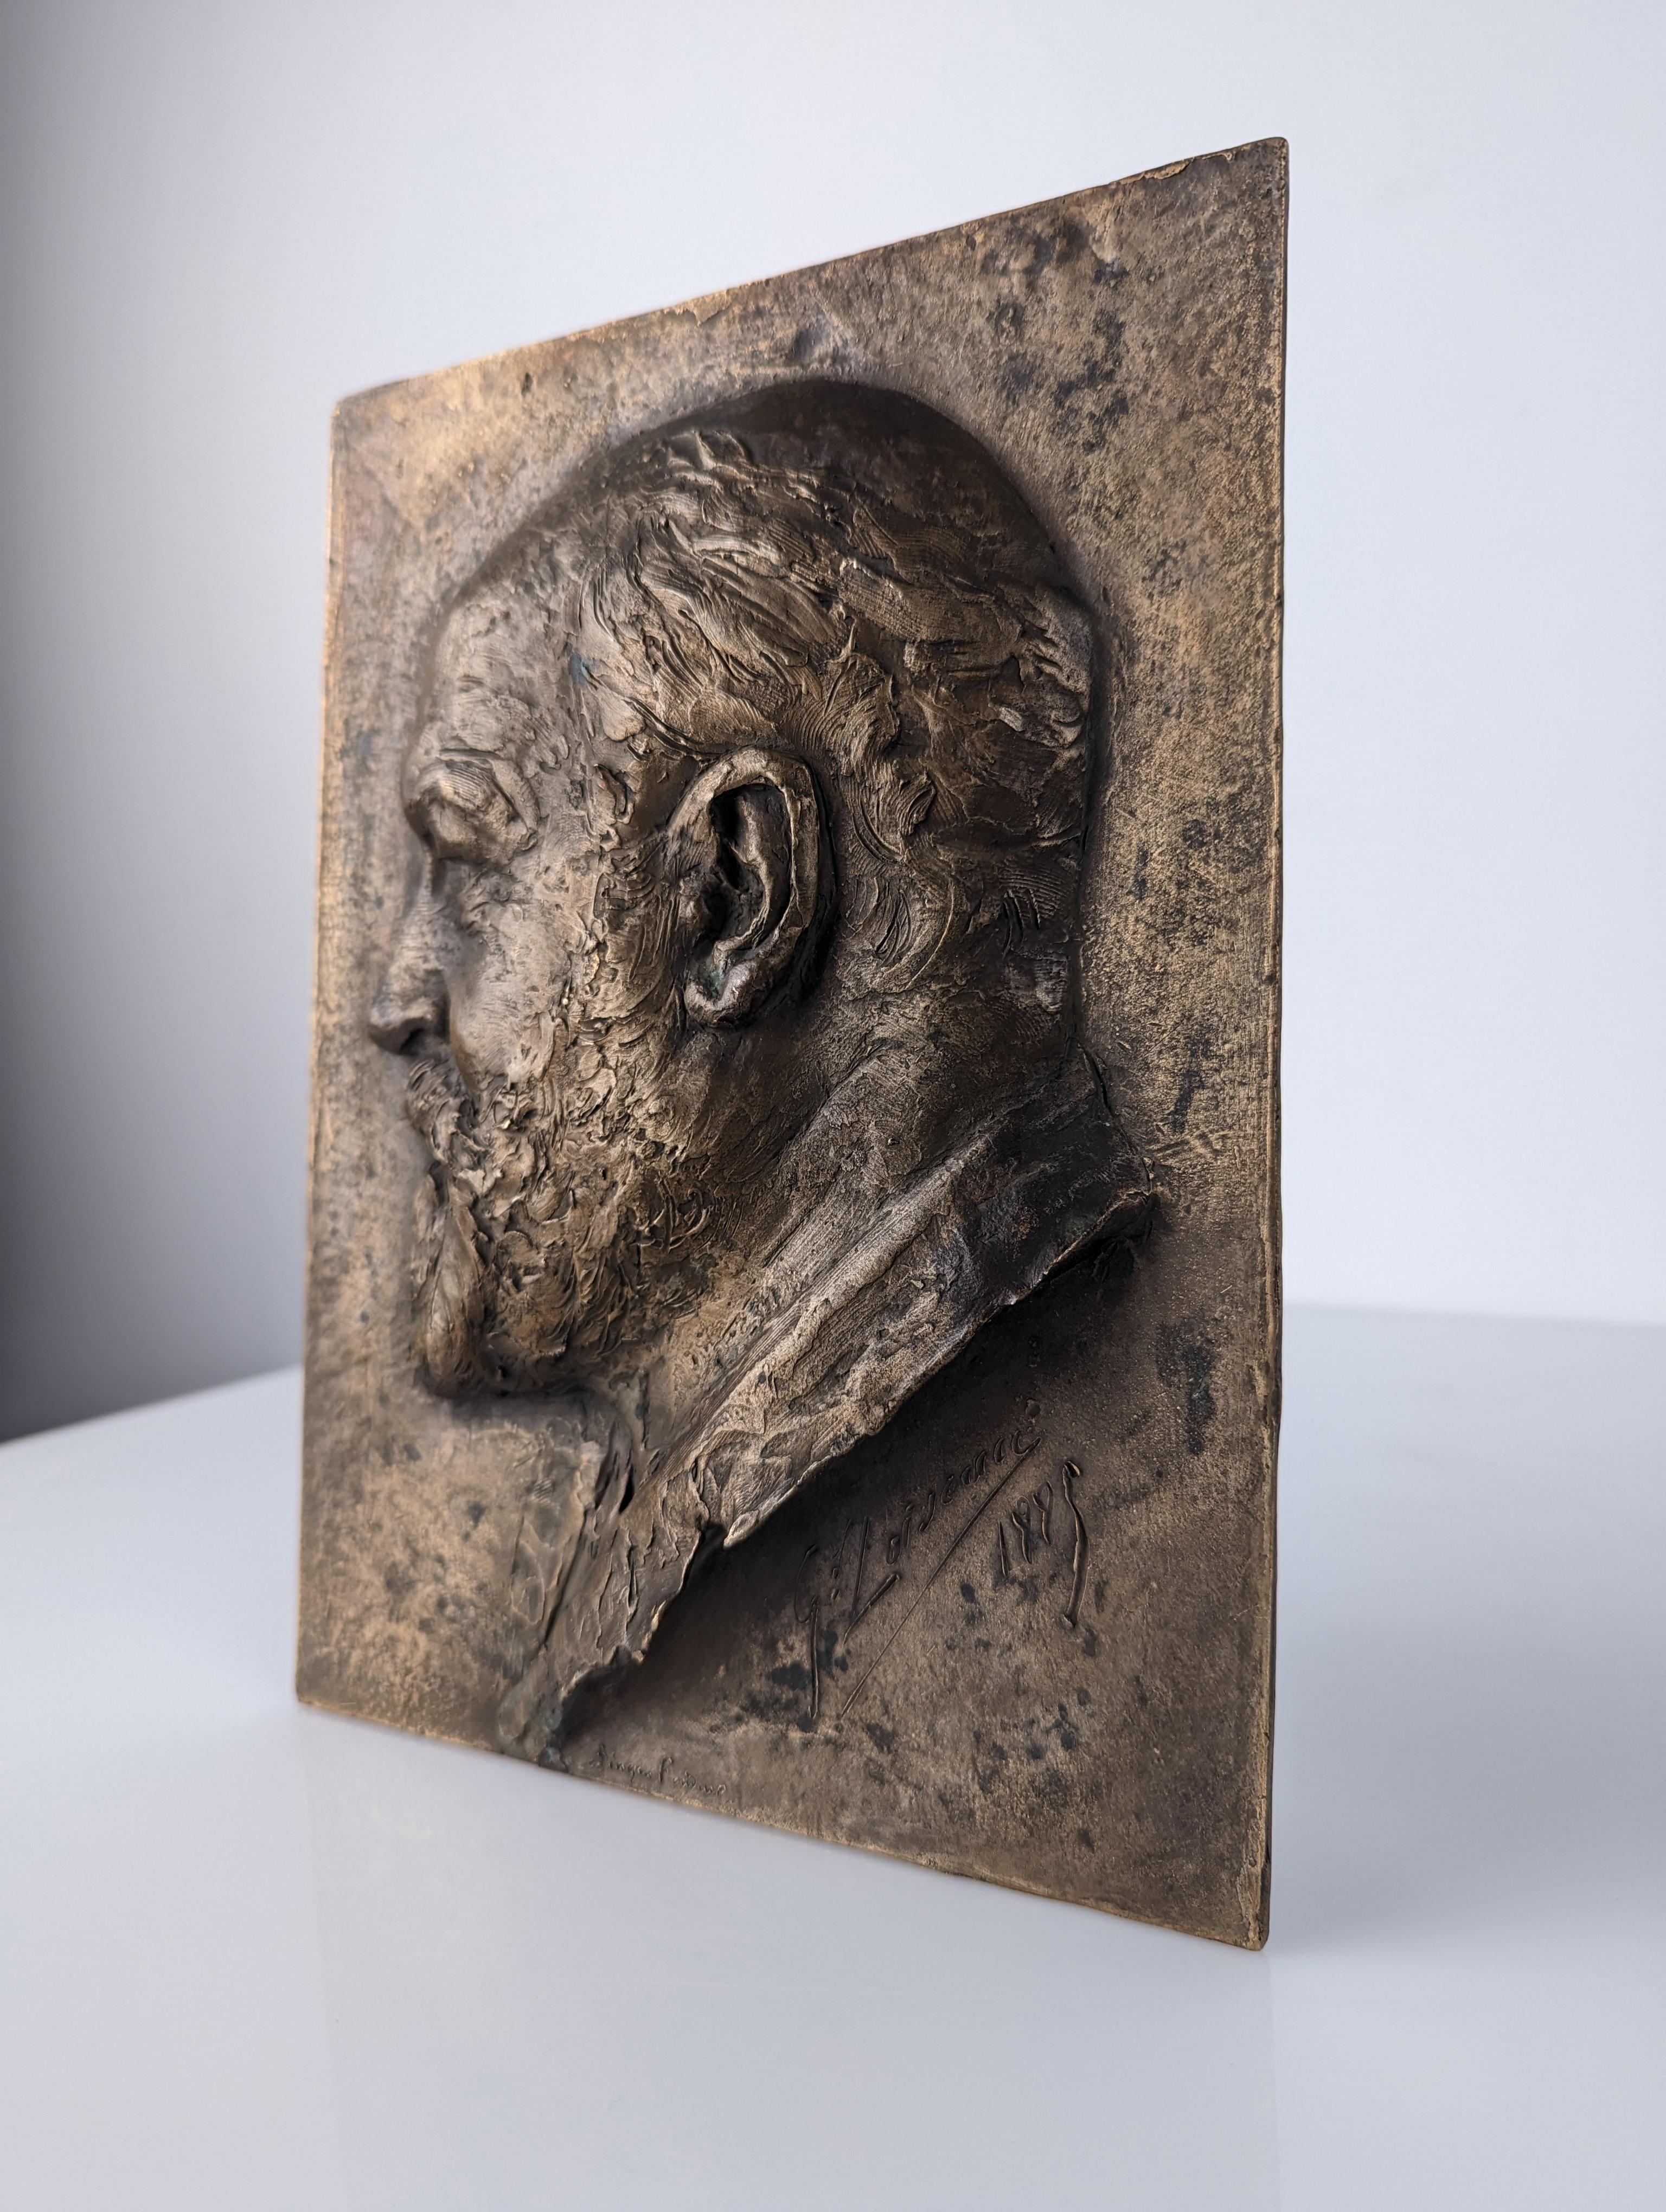 Magnificent relief work portraying a man made in bronze signed G Loiseau attributed to the great post-impressionist French artist Gustave Loiseau. This attribution is given by not knowing sculpture work by the artist since his work focused on oil